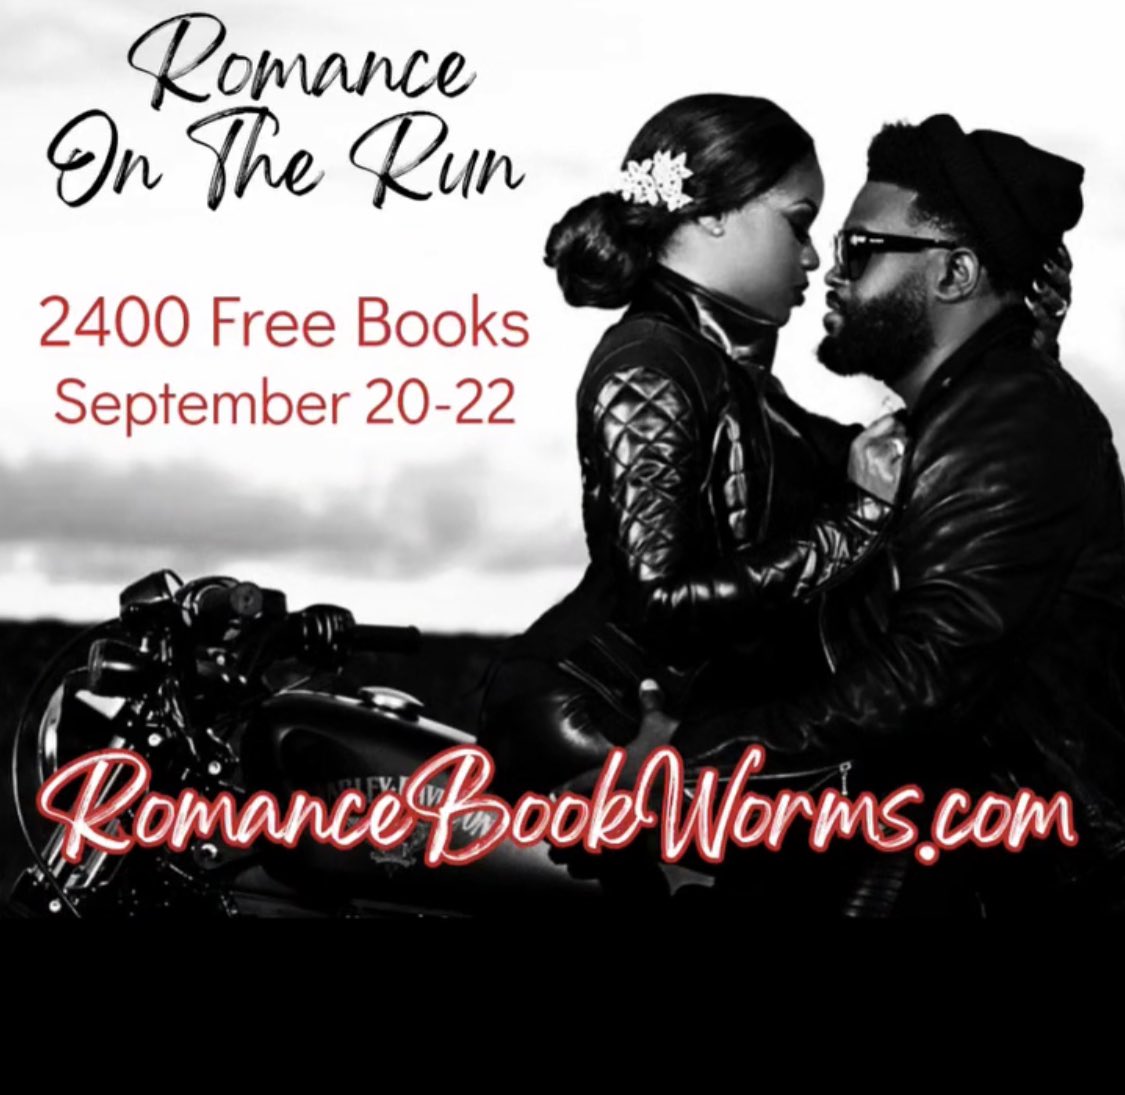 romancebookworms.com/stuff-your-kin…
Oh Beautiful Ones! 🥰💃🏾🦋📚🎁🎉🖤❤️
2400 Free Romance Books!
230 Books by Black Authors!
9/20-9/22
Tell all your reader friends! 
It's all about LOVE!
#StuffYourKindle
#RomanceBookWorms

#RomancingTheReader
#RomanceOnTheRun
#FreeBlackRomance